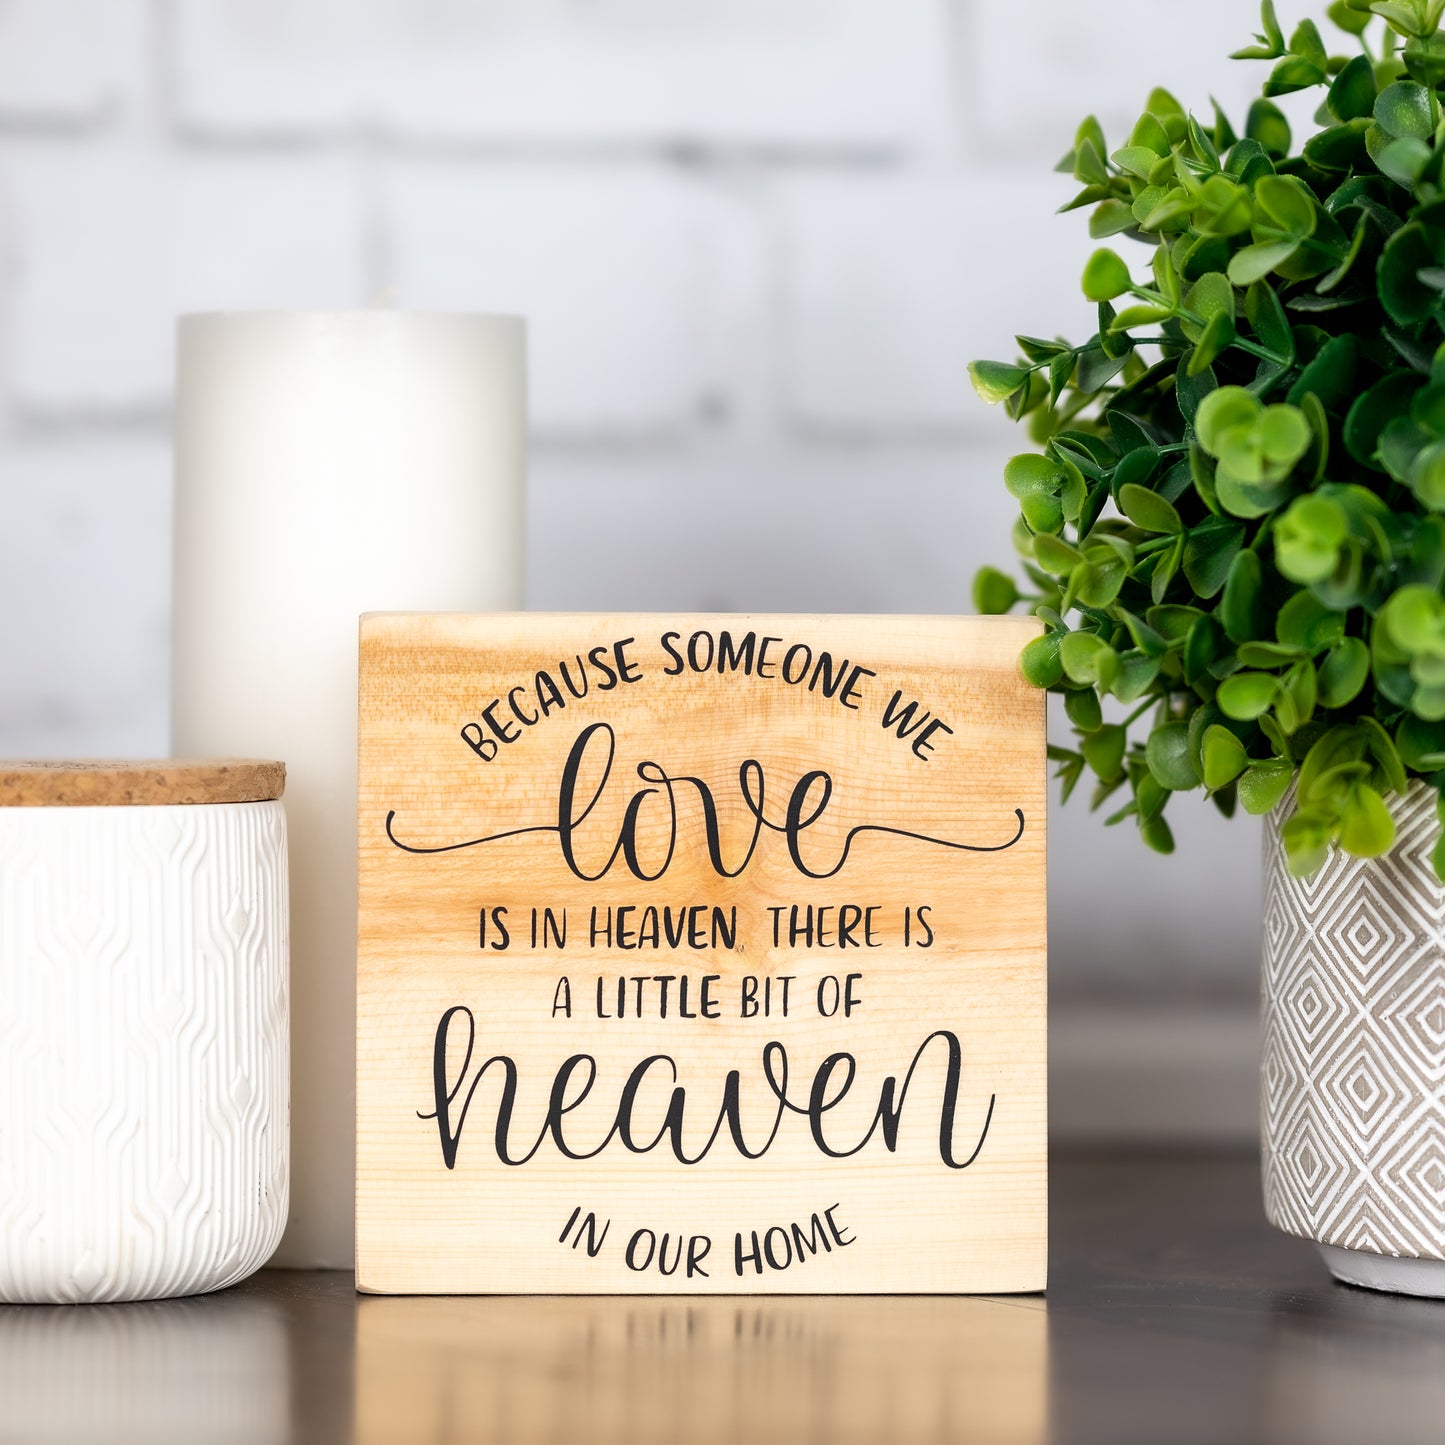 beacuse someone we love is in heaven there is a little bit of heaven in our home ~ shelf block sign